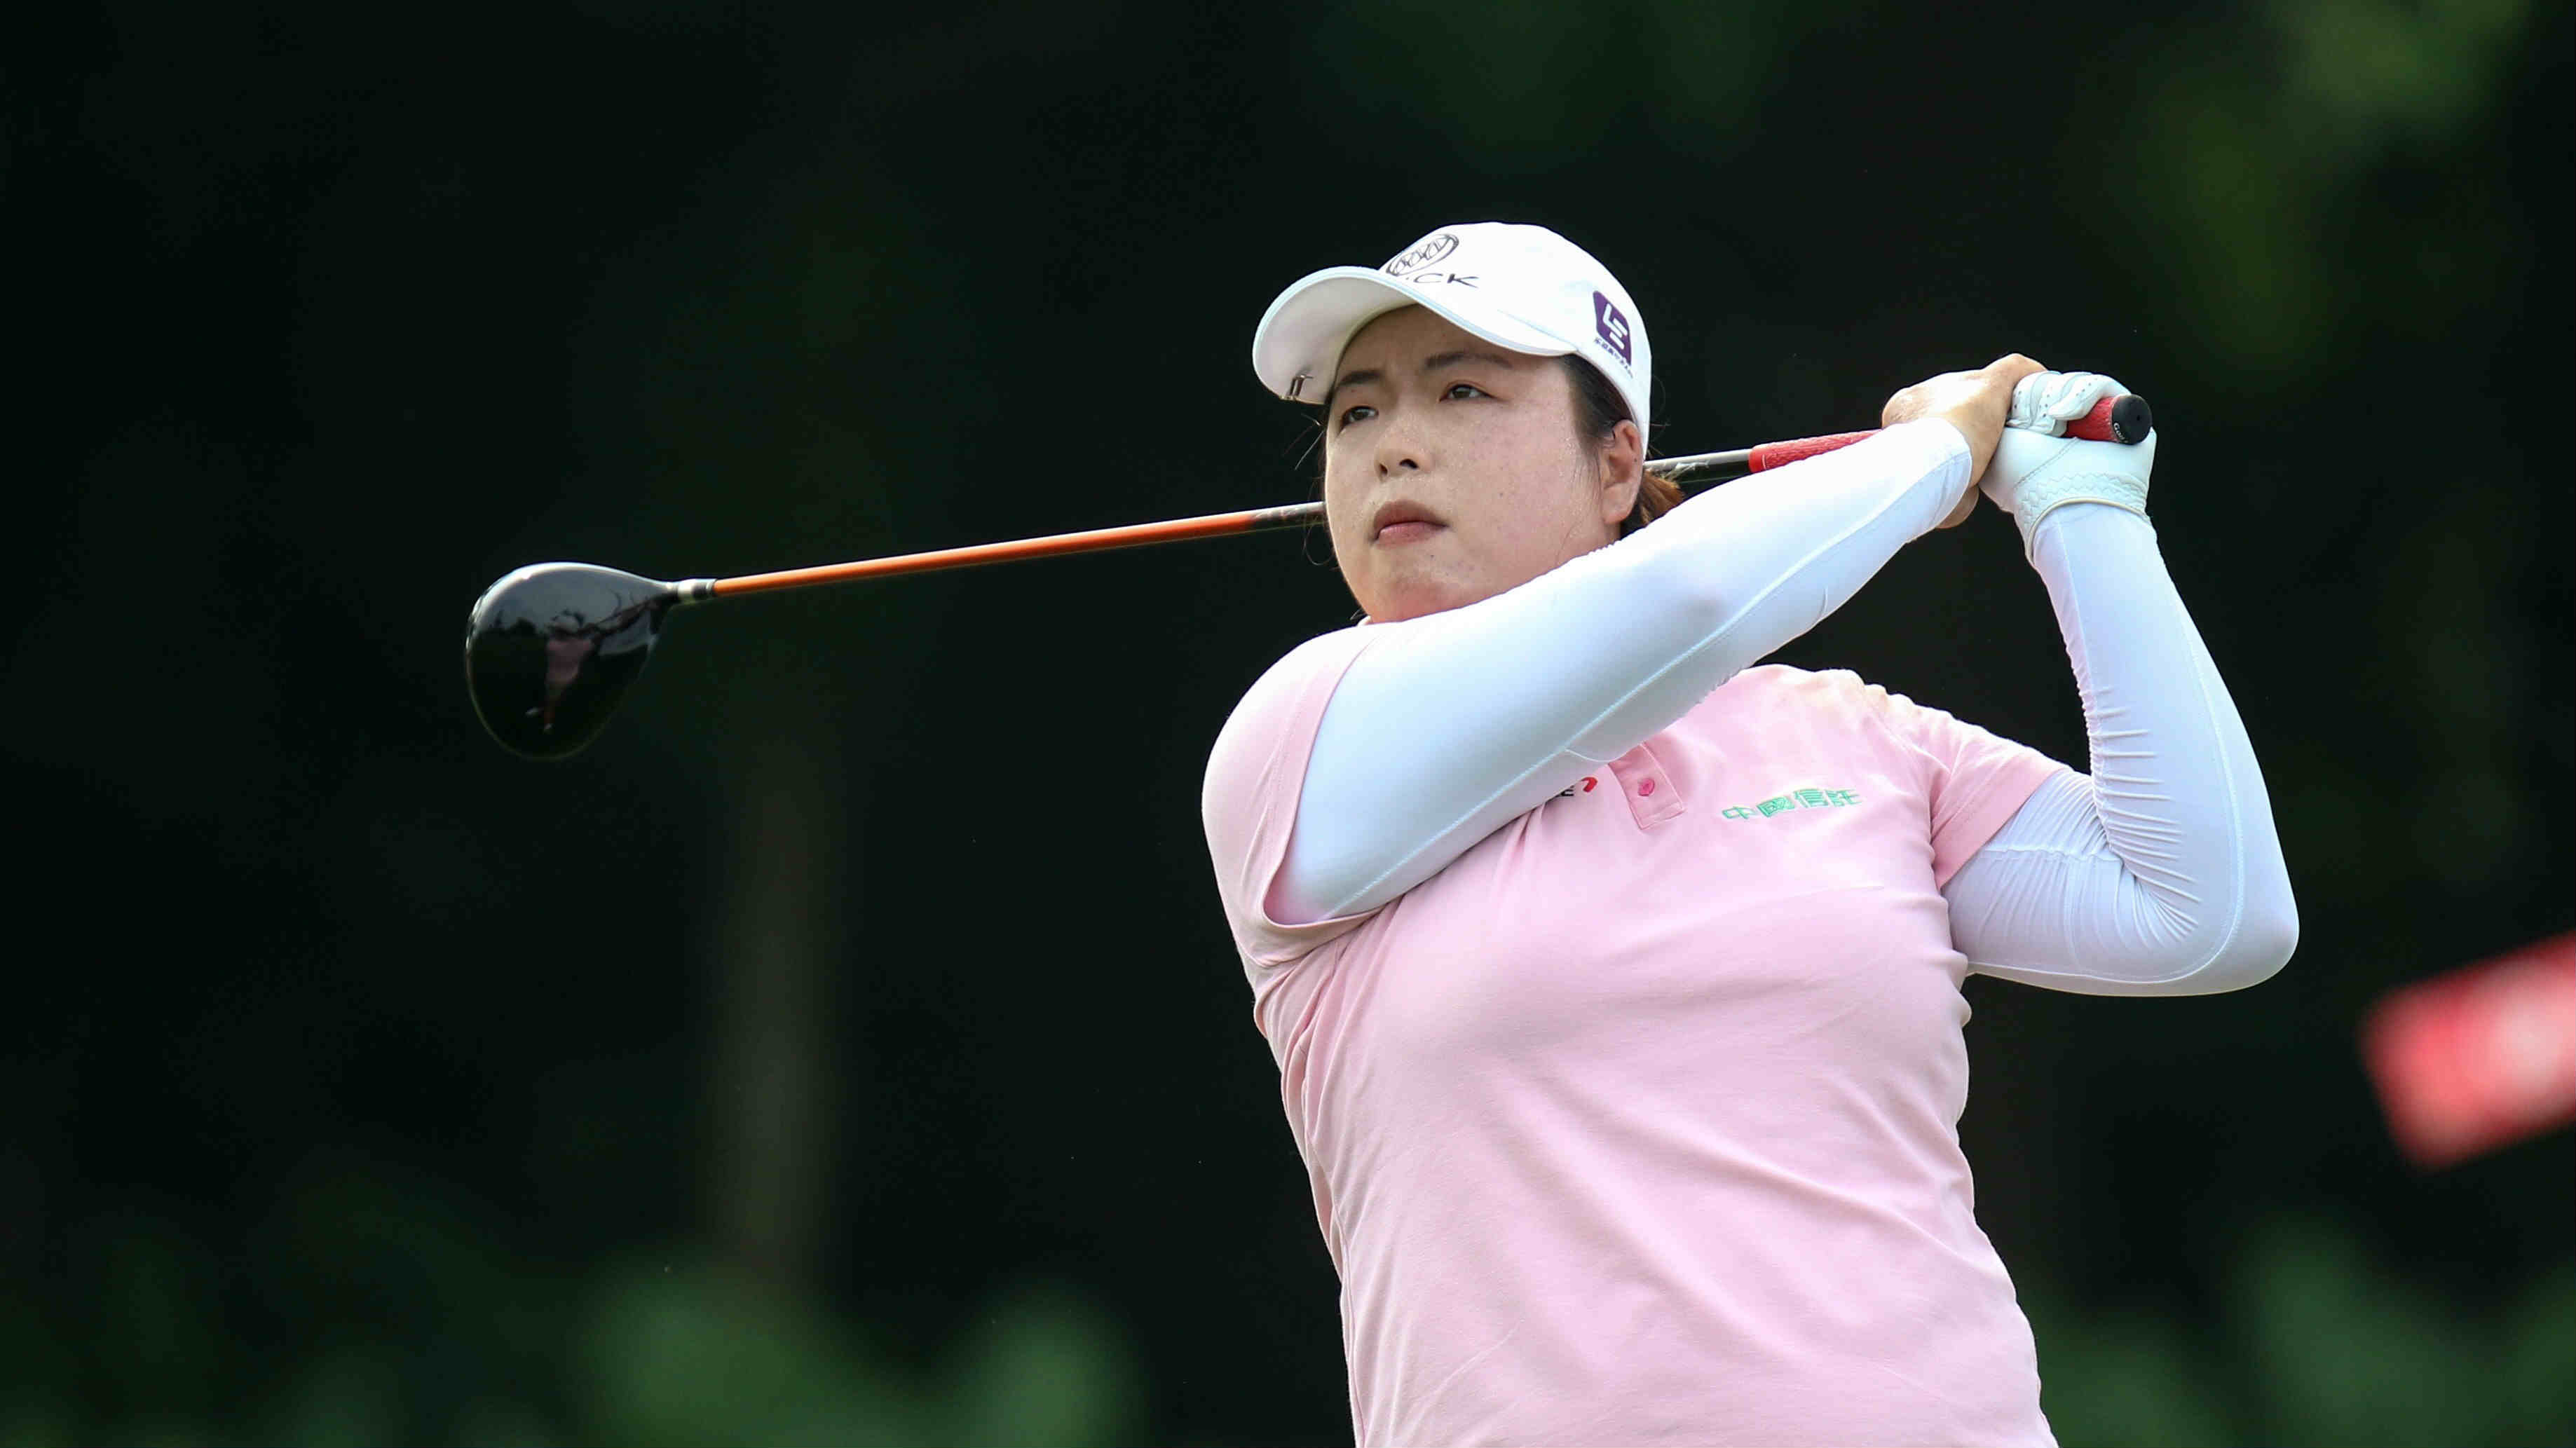 Feng Shanshan is China's first world number 1 golfer